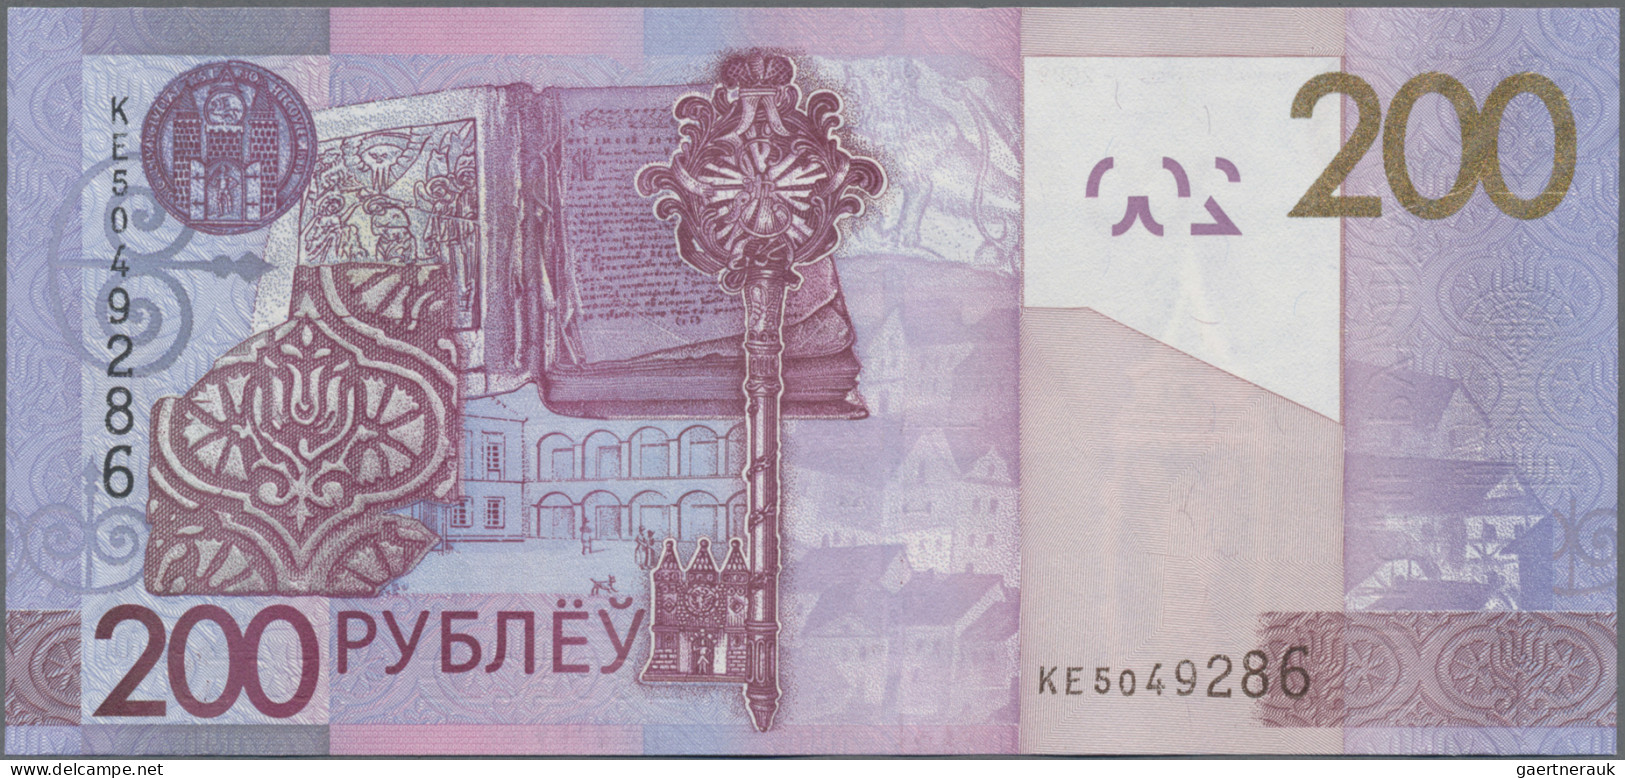 Belarus: National Bank Of Belarus, Set With 7 Banknotes, Series 2019-2022, With - Bielorussia